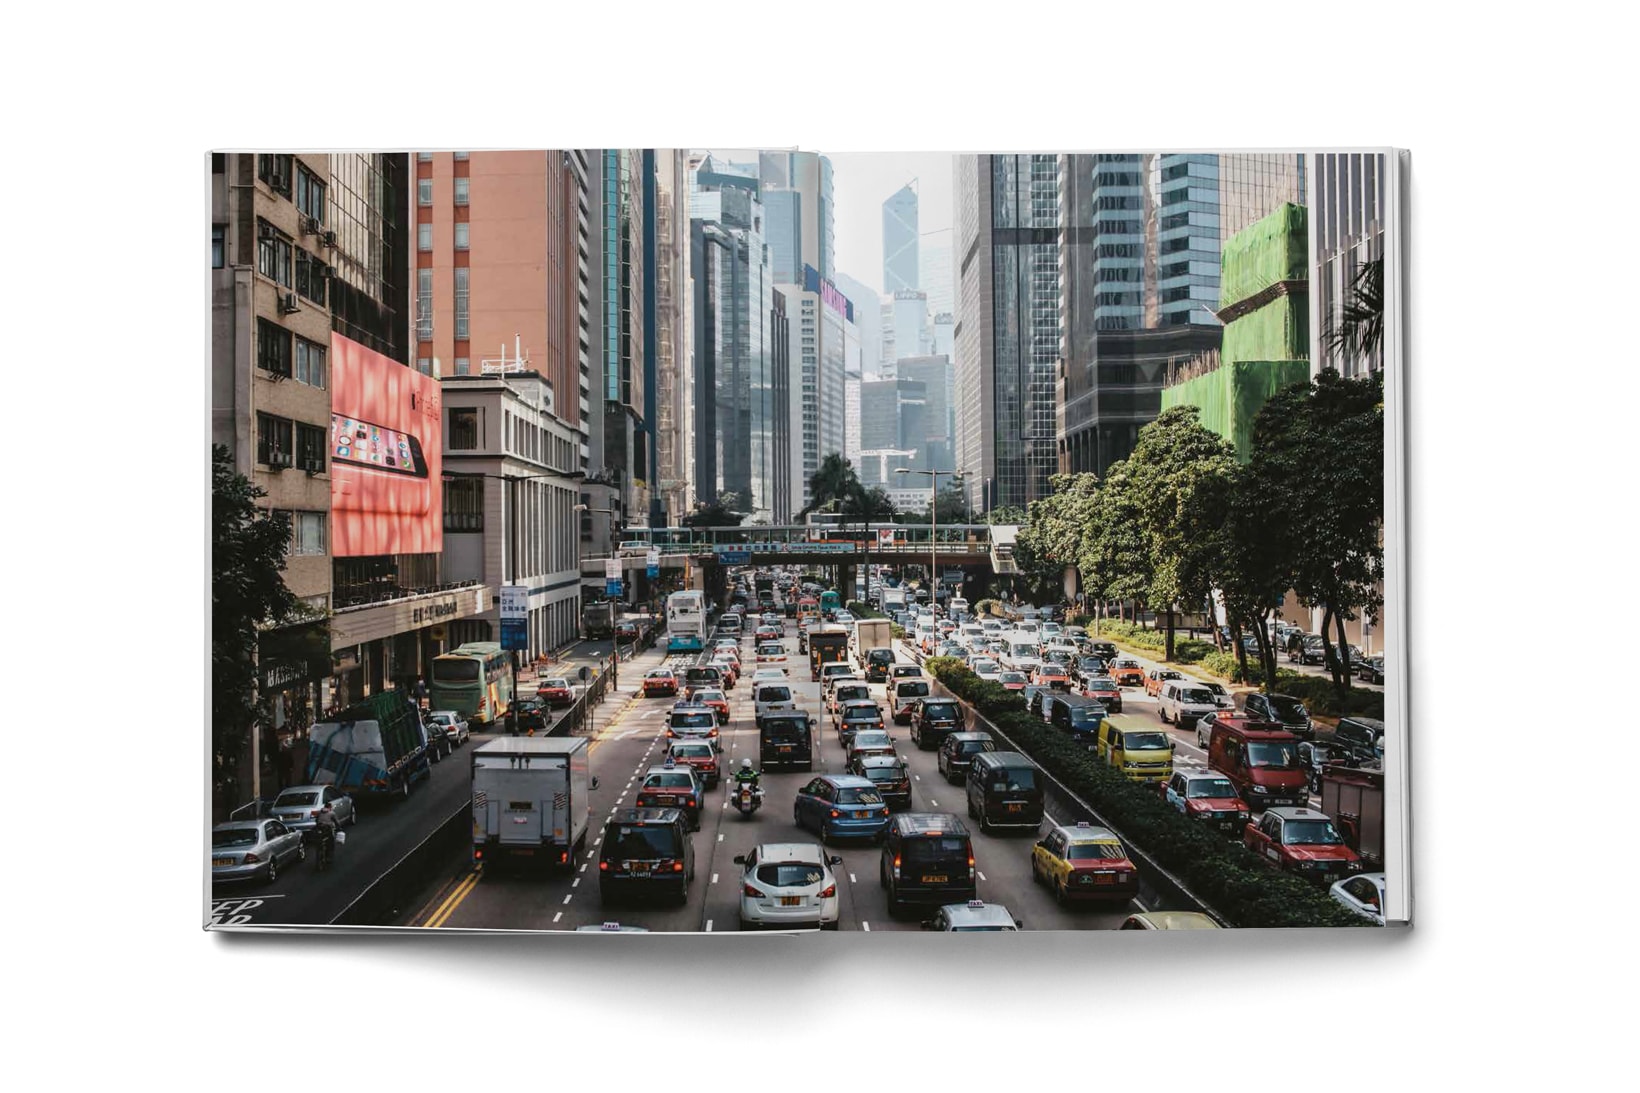 karl hab 24h hong kong book photography photographer visuals images spreads urban landscape asia travel